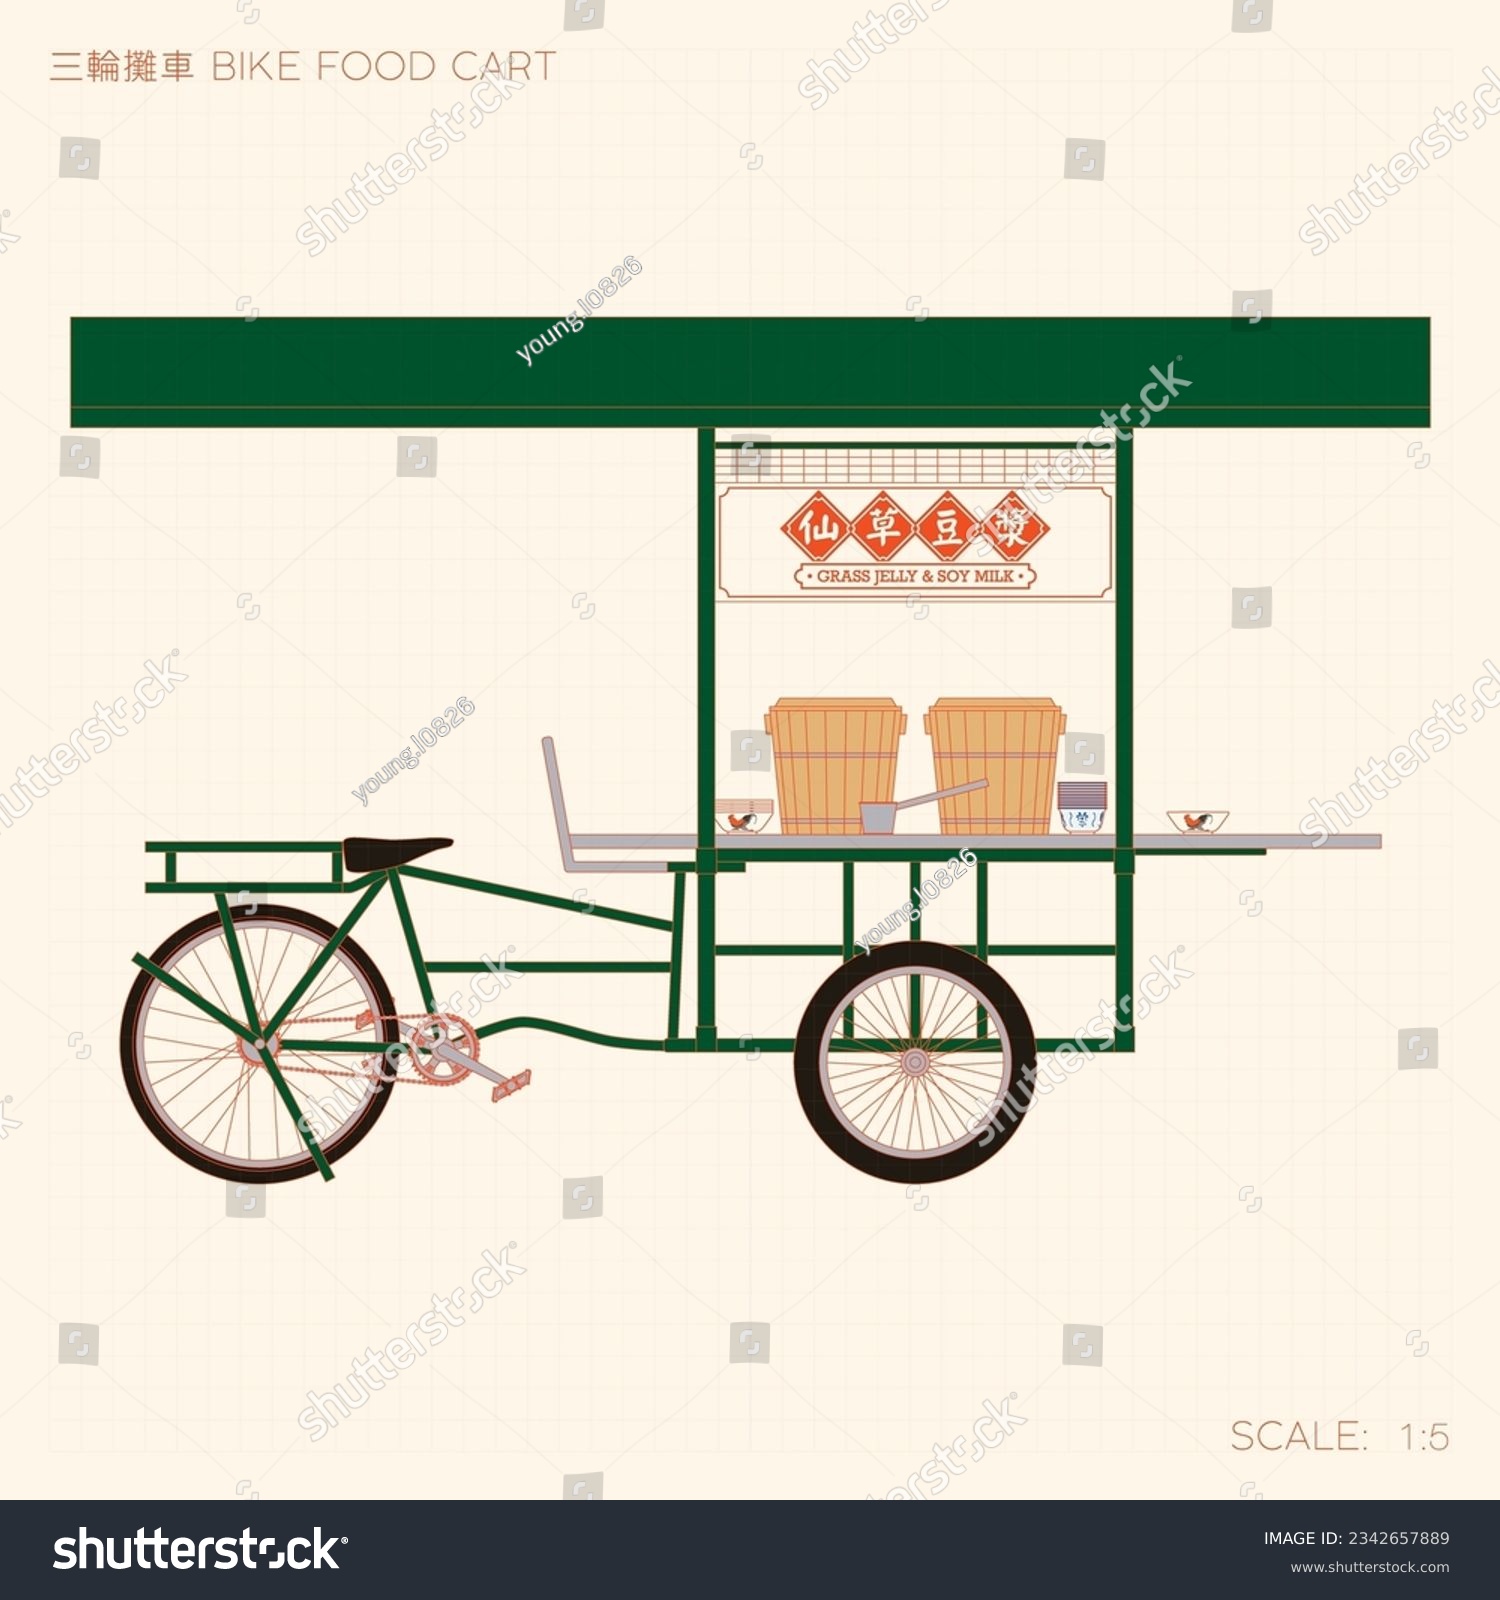 SVG of Old Street Bike Food Cart Technical Drawing. Translation: (Title) Bike Food Cart, (Signage) Grass Jelly and Soy Milk svg